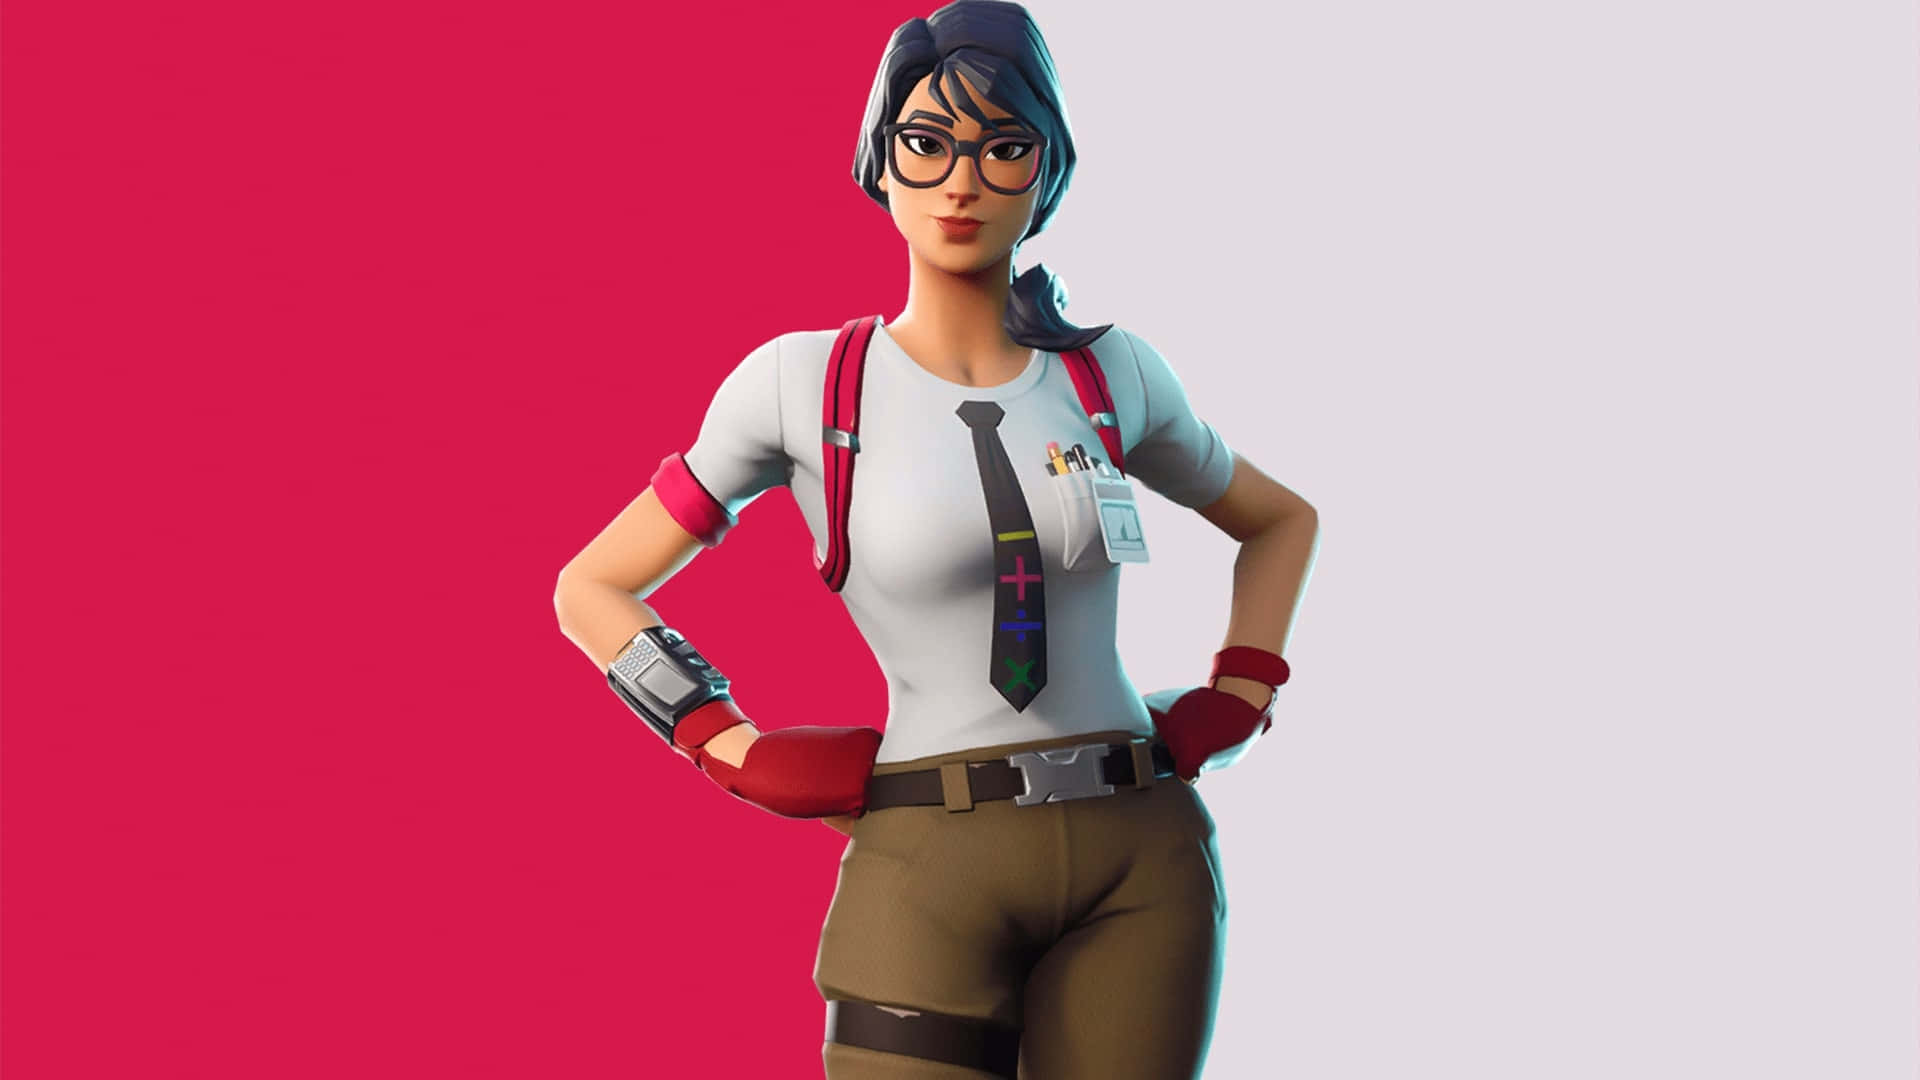 Fortnite - A Woman In Glasses And A Tie Wallpaper